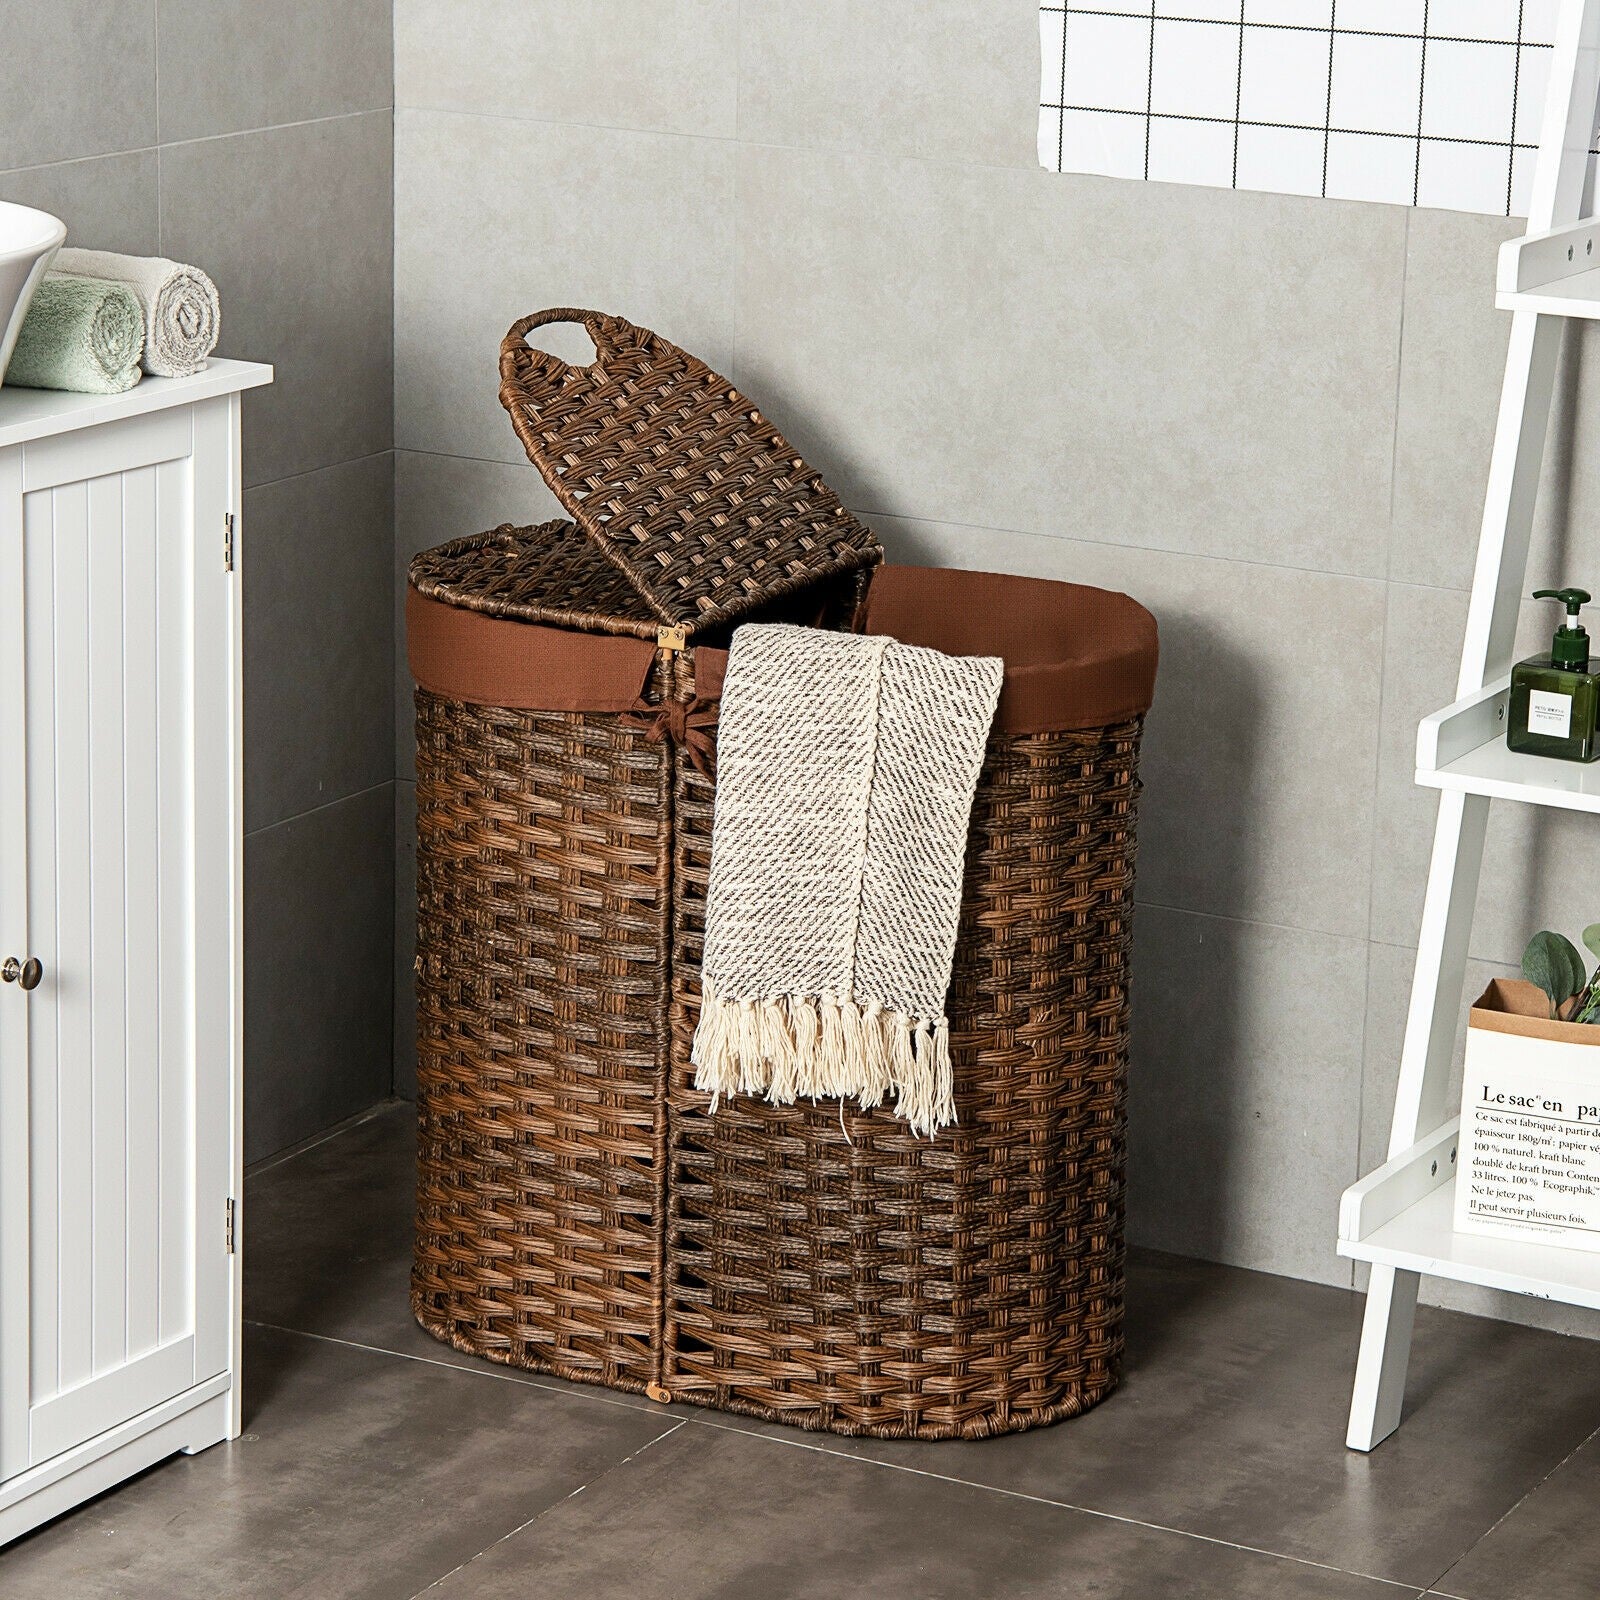 Hand-Woven Double Laundry Hamper with Lid